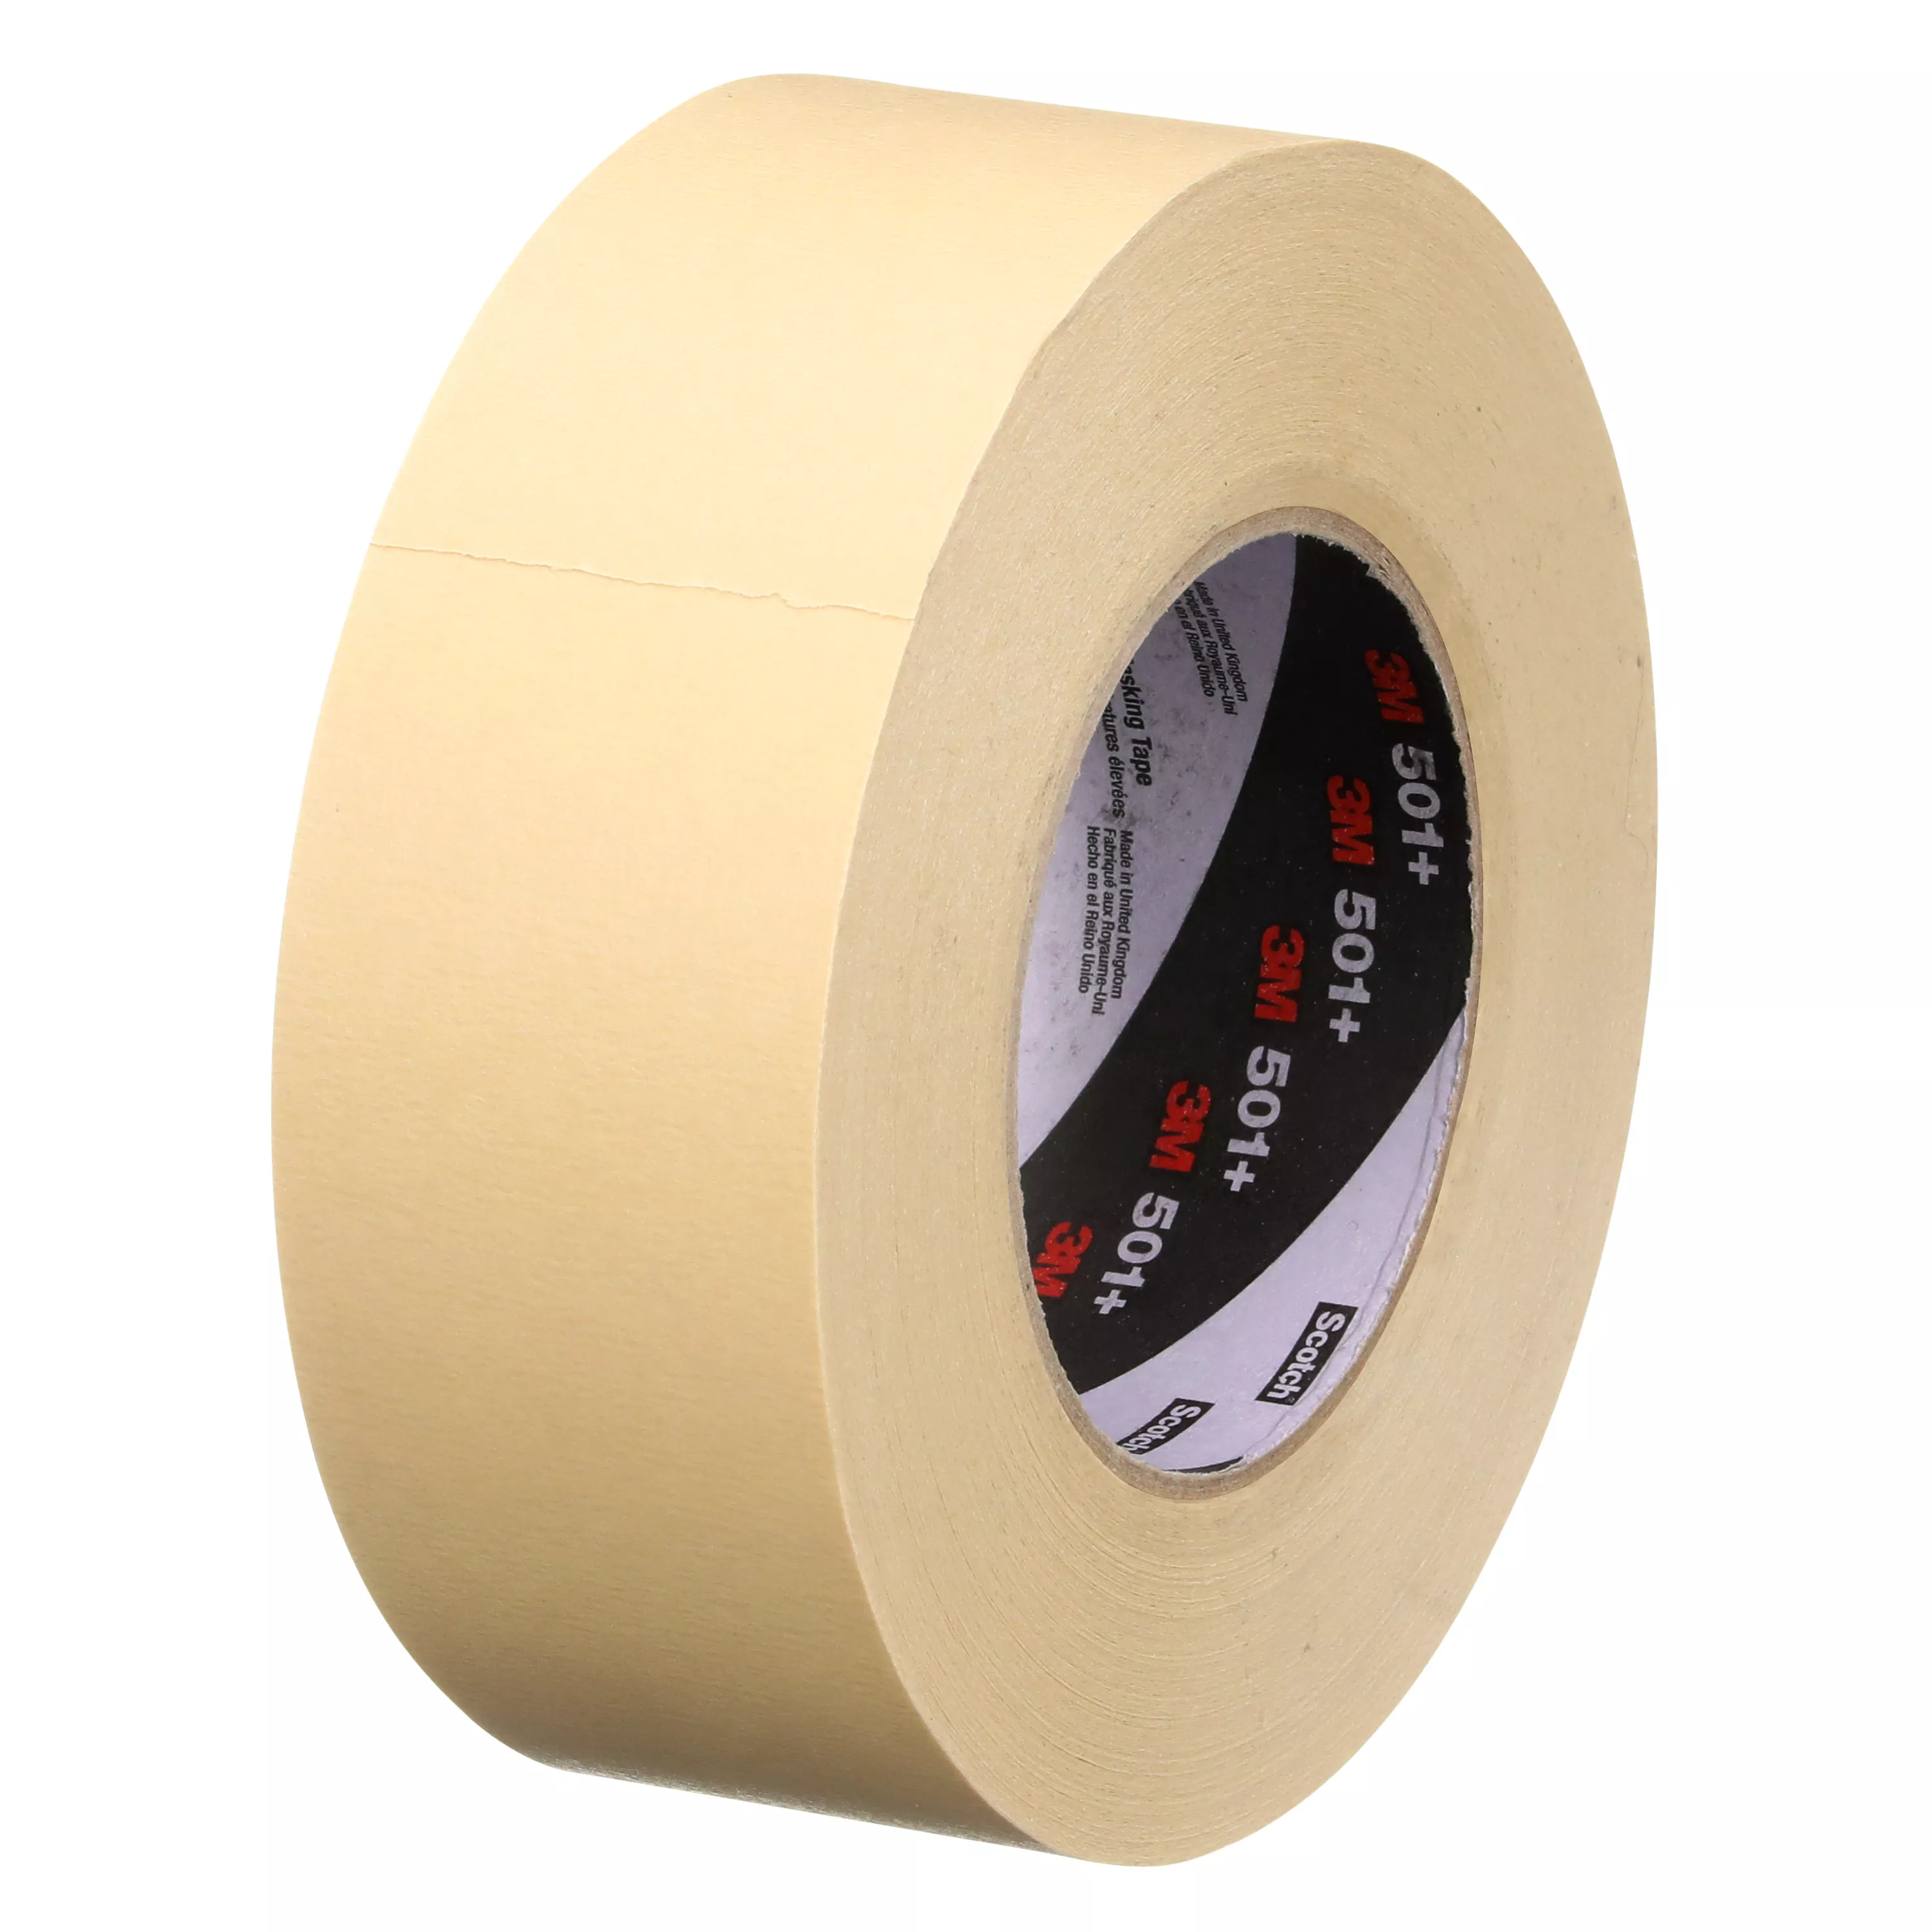 SKU 7000138488 | 3M™ Specialty High Temperature Masking Tape 501+